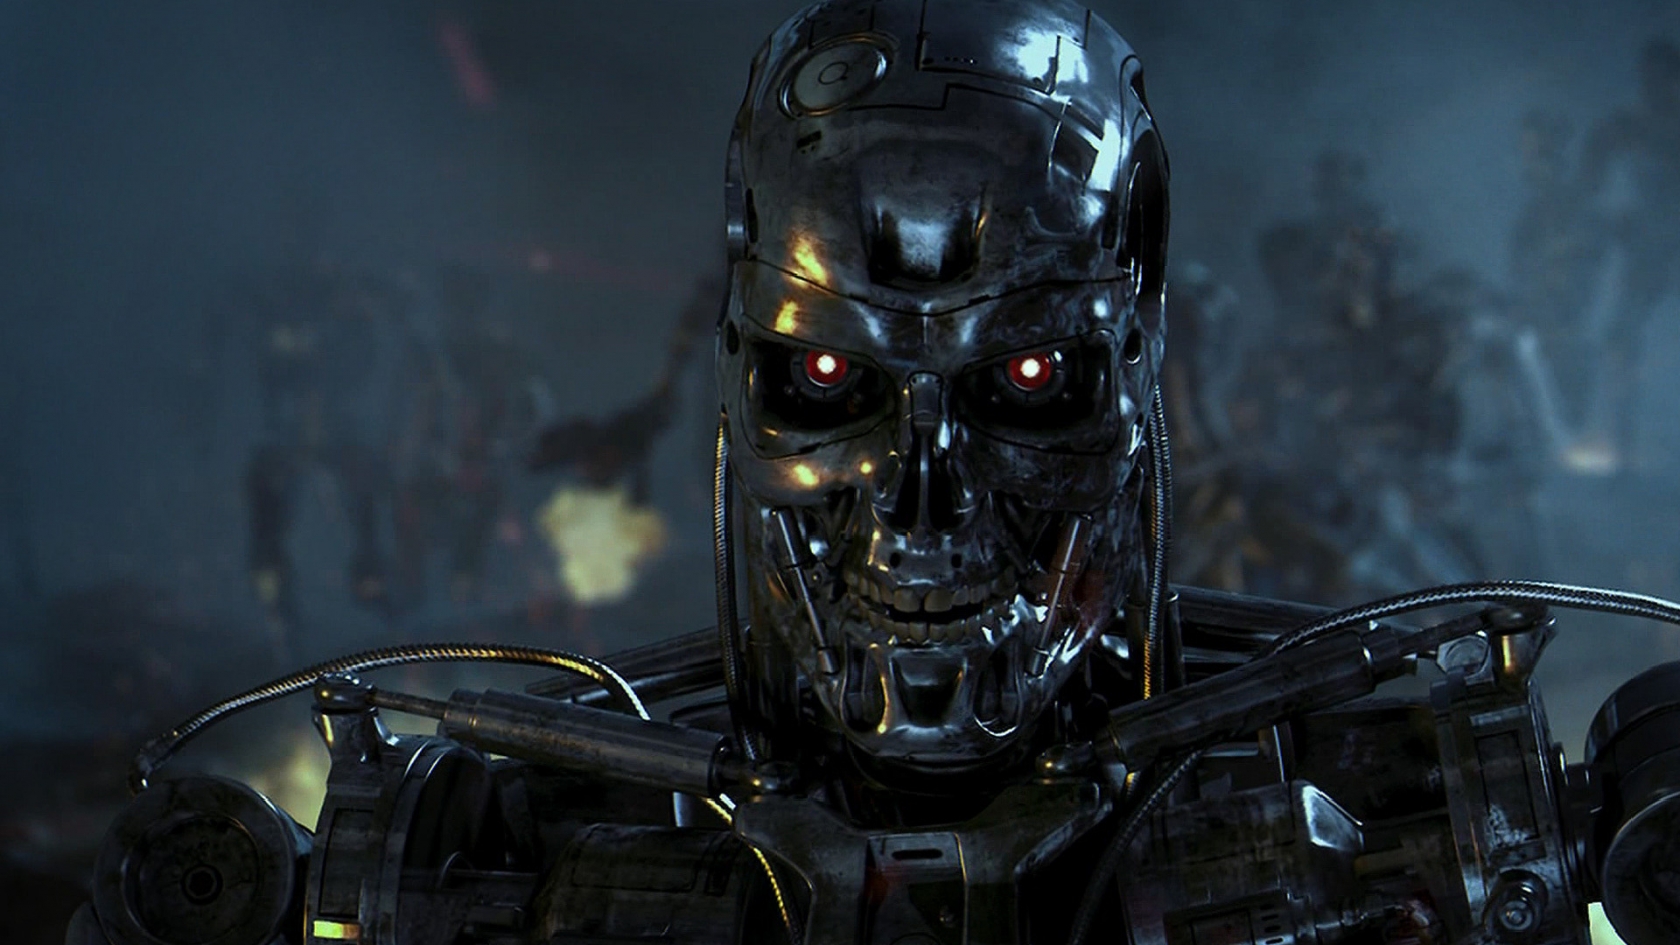 Terminator Rise of the Machines for 1680 x 945 HDTV resolution